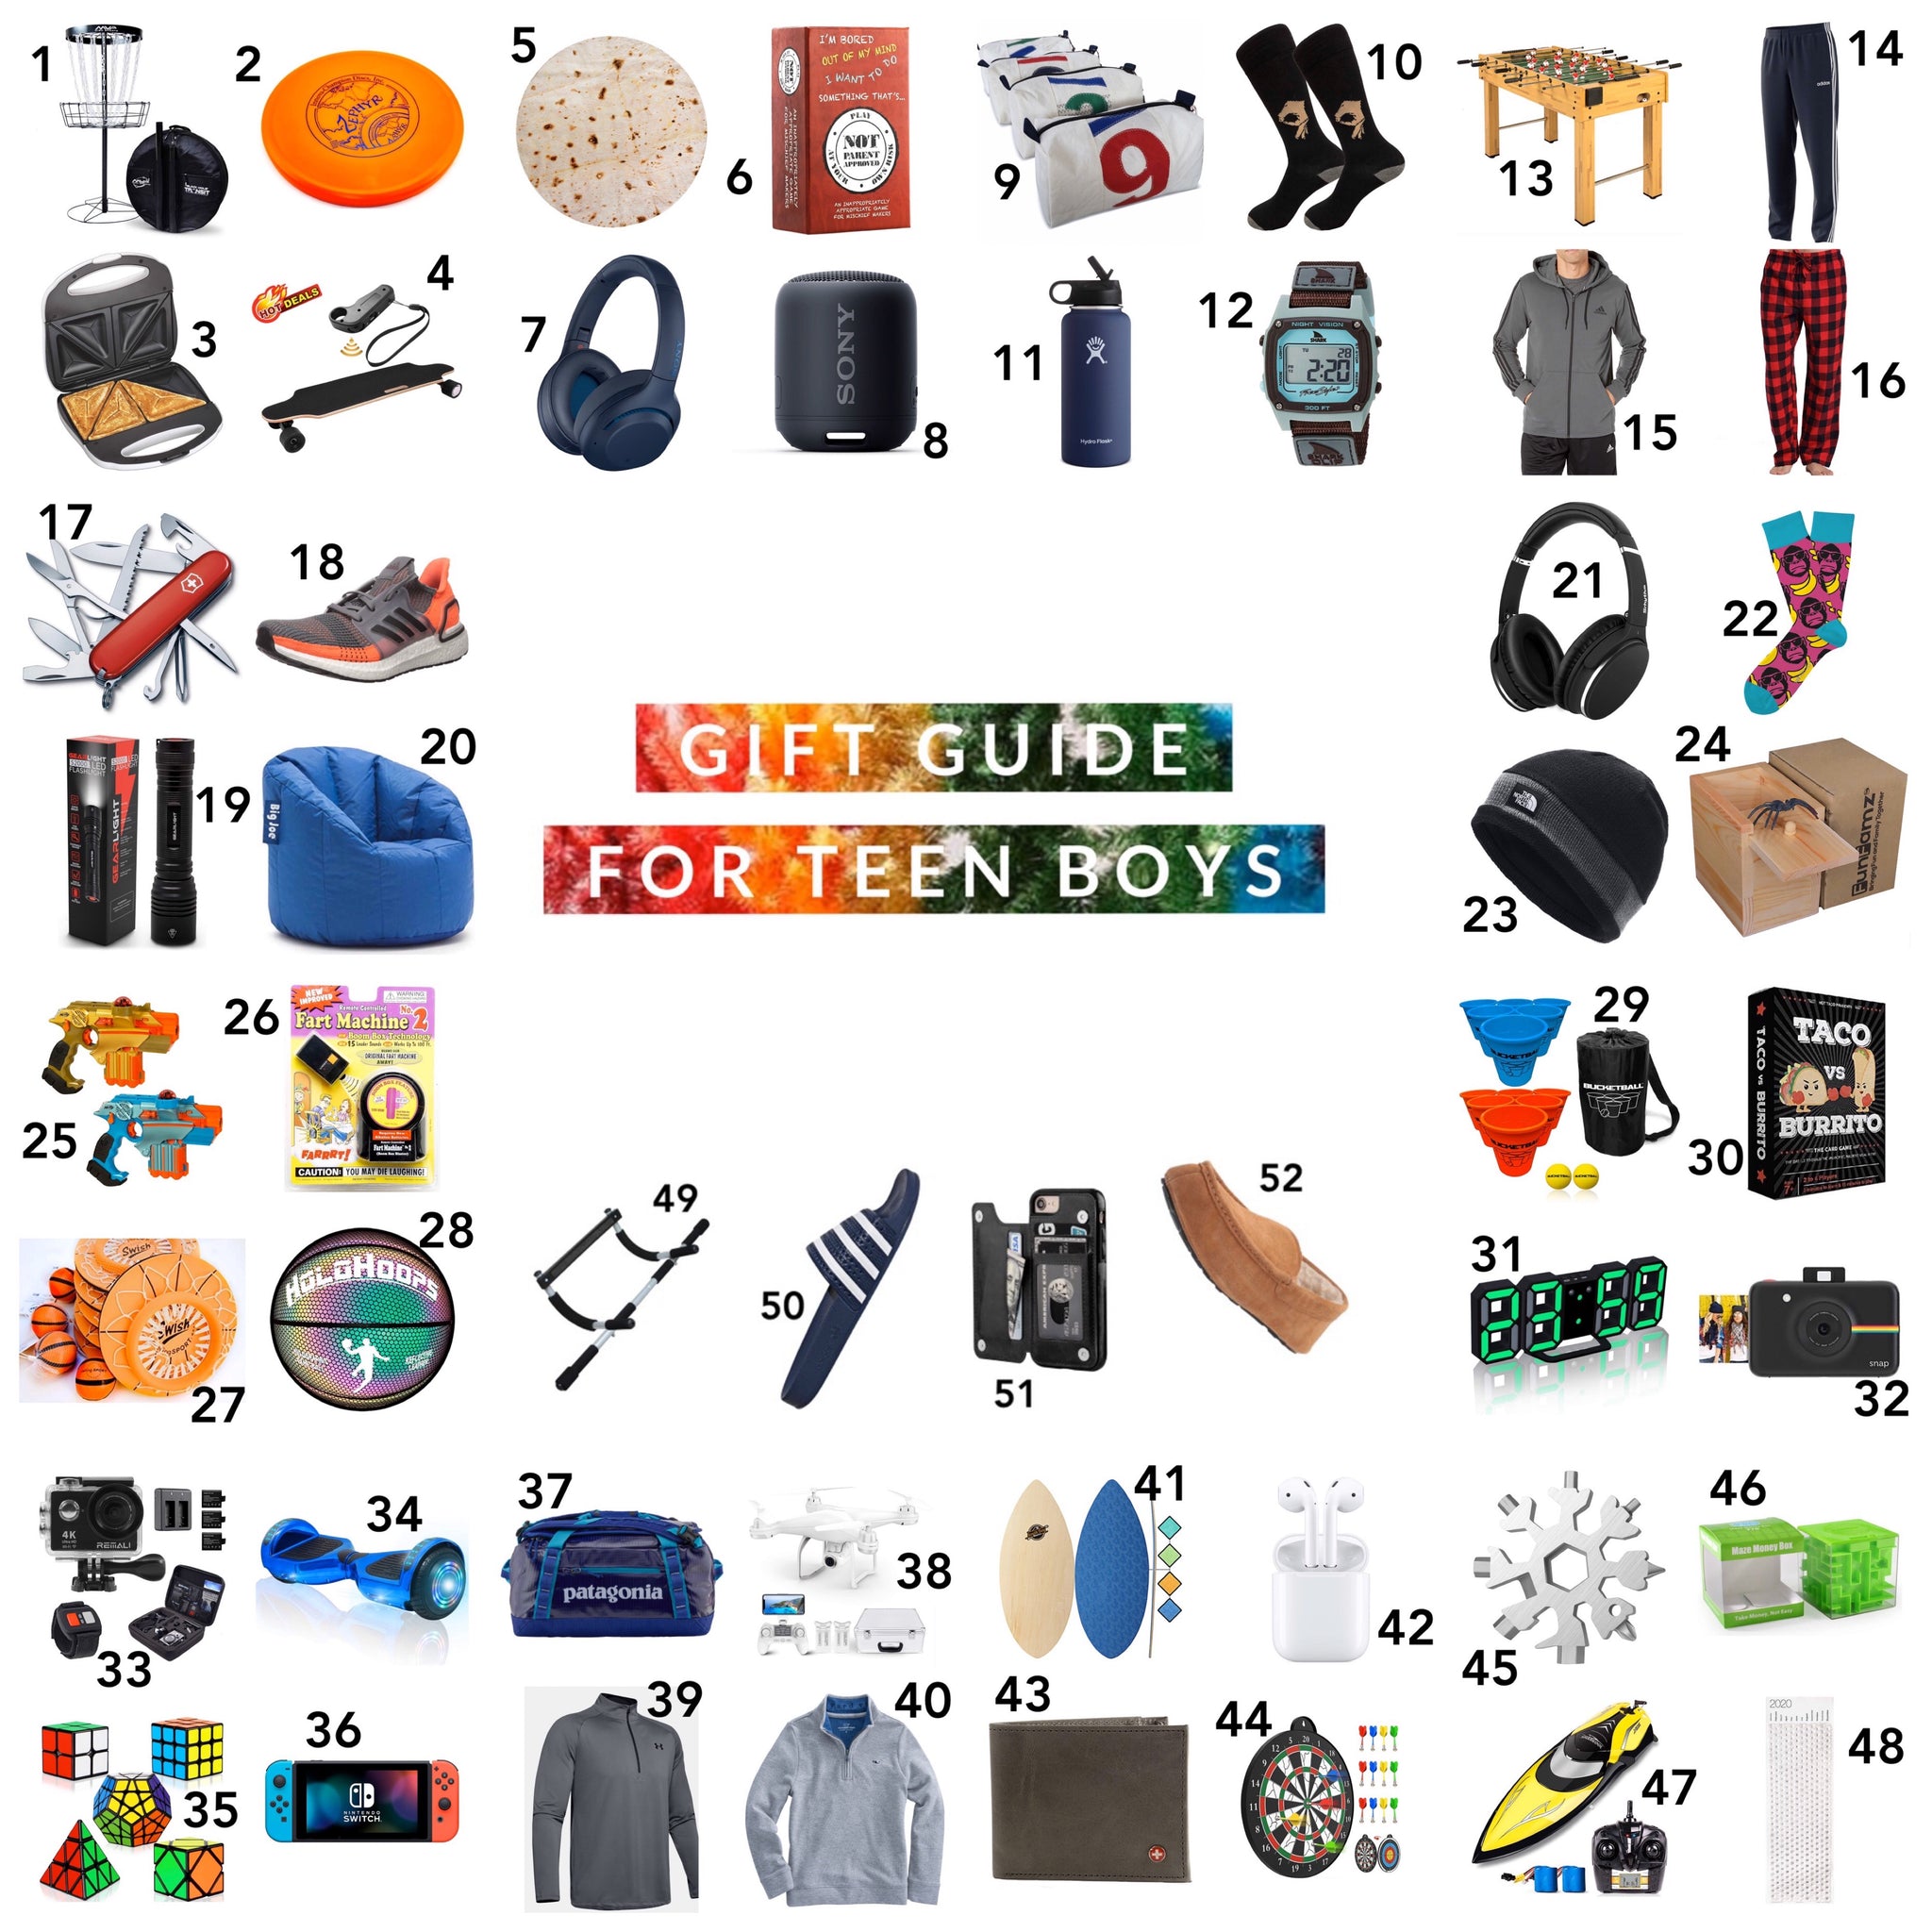 16 Year Old Boy Gift, Best Birthday Gifts for 16 Year Old Boy, 16 Year Old  Boy Birthday Gifts, Boys Age 16 Gifts Ideas, 16 Yr Old Gifts for Boys, 16th  Birthday